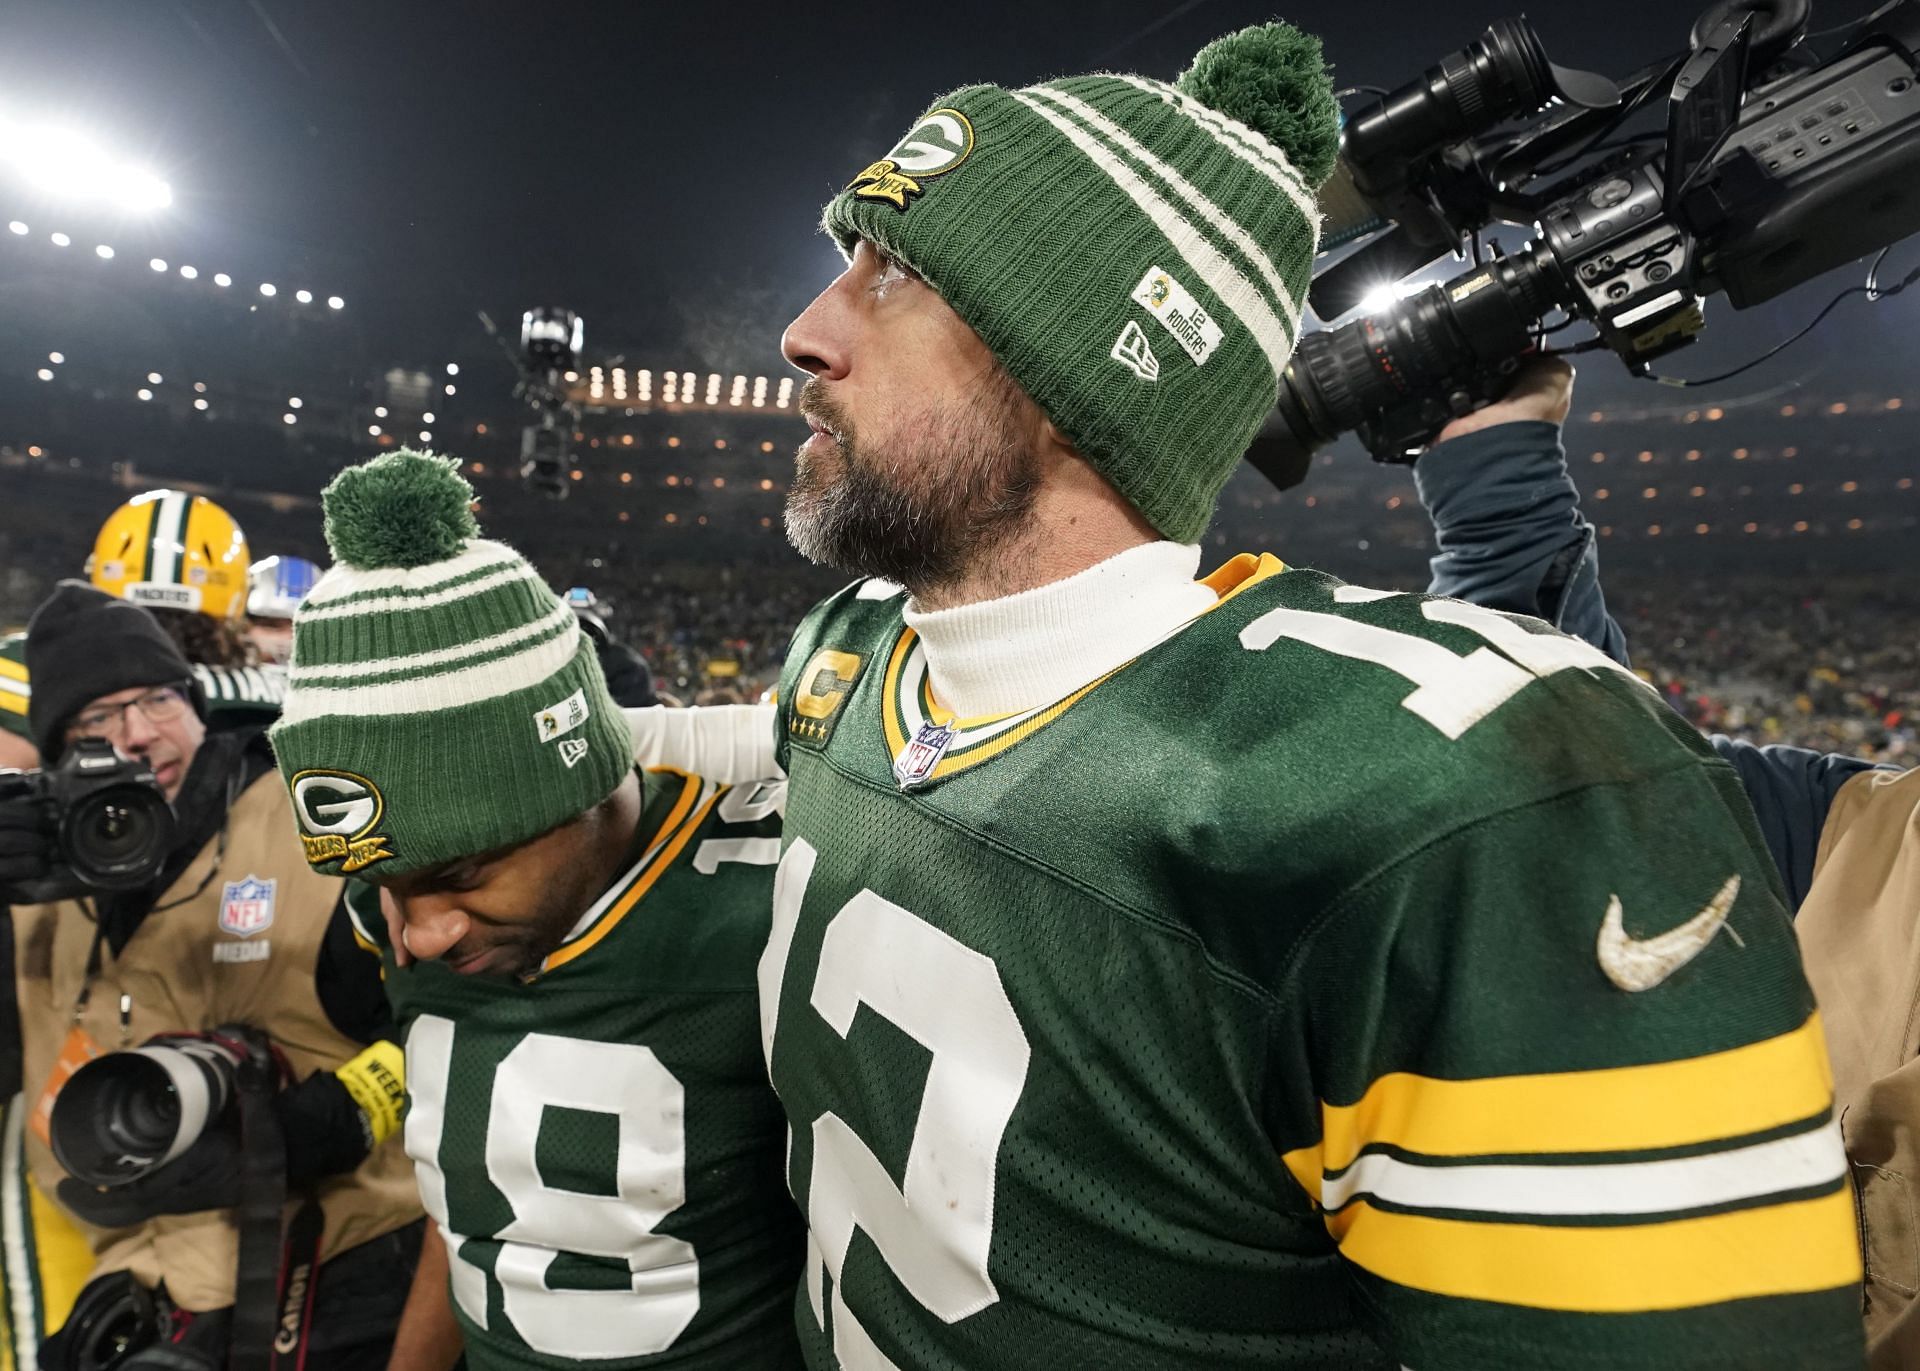 The Green Bay Packers stiffed Aaron Rodgers again and now divorce